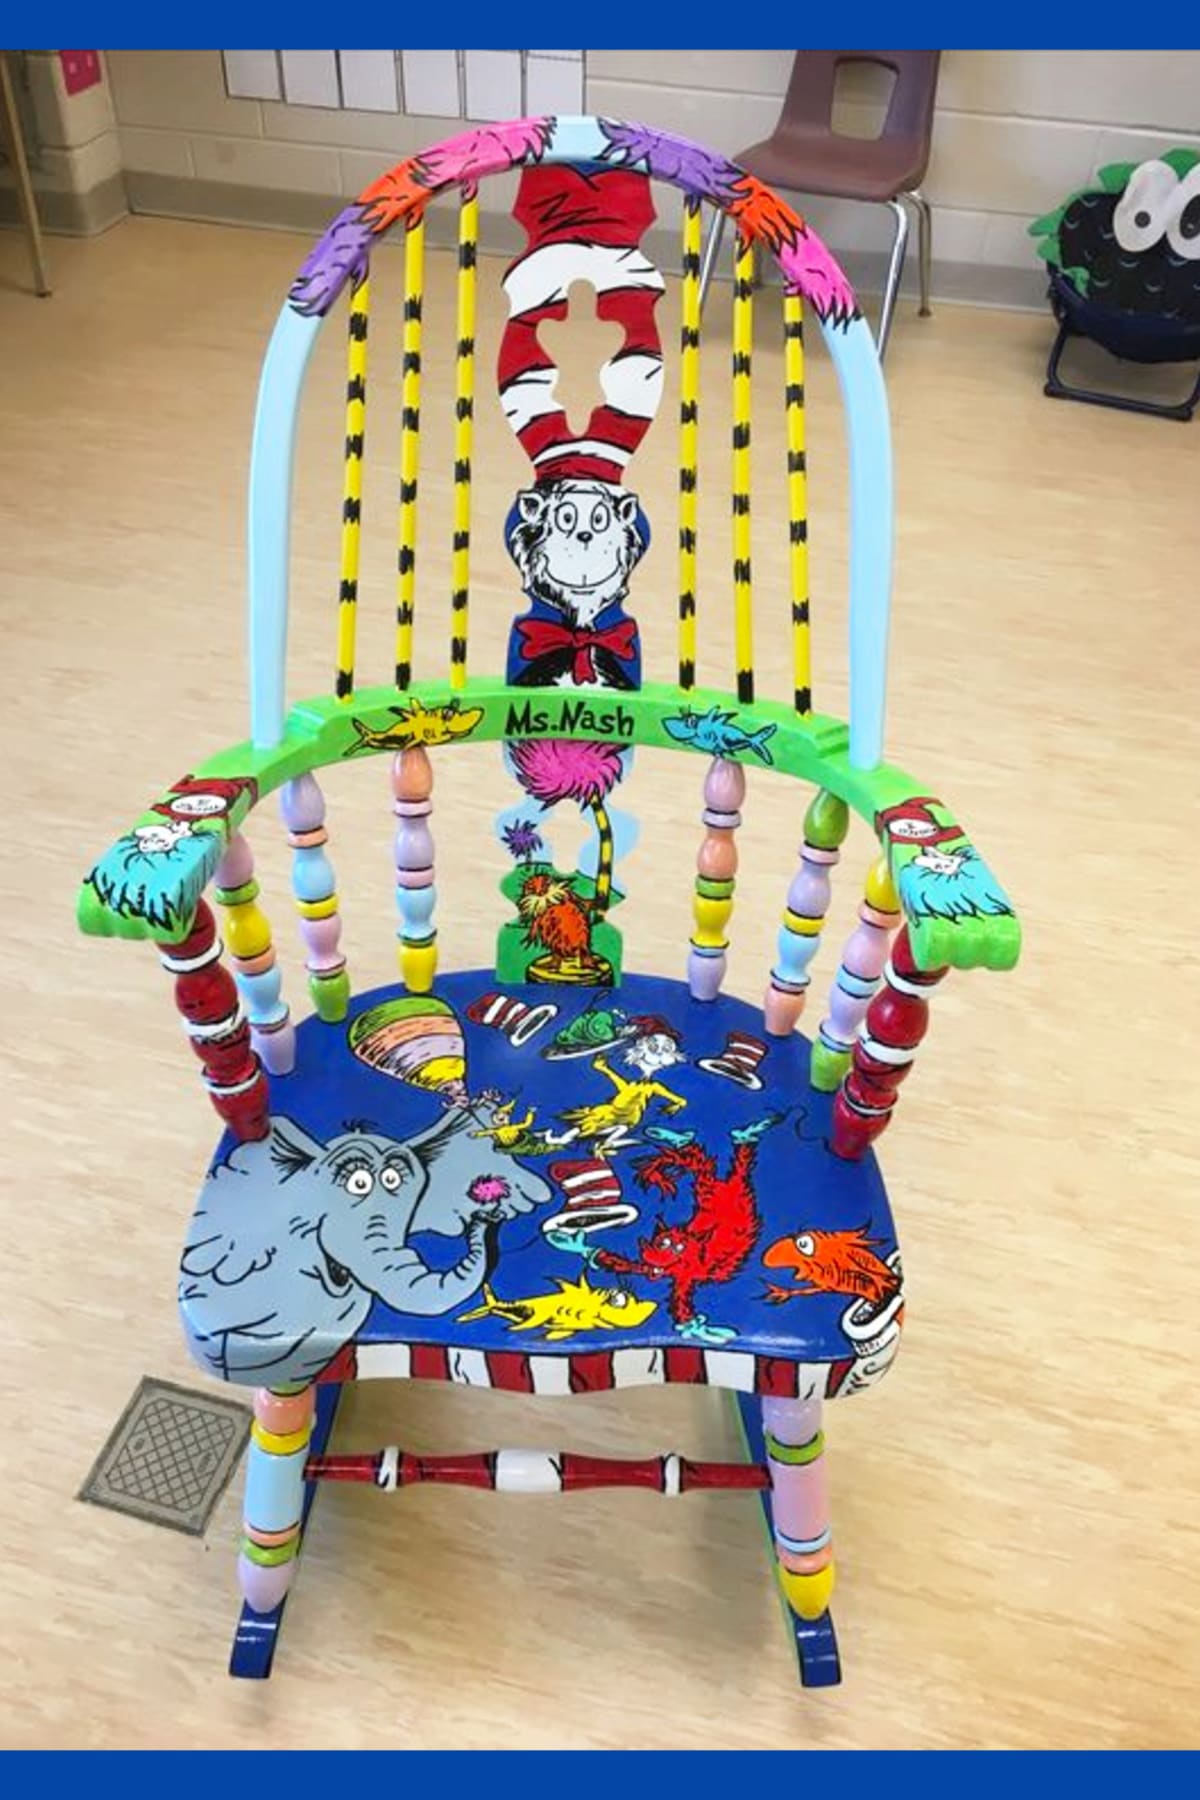 Dr Seuss reading chair - painted teacher rocking chairs for classrooms